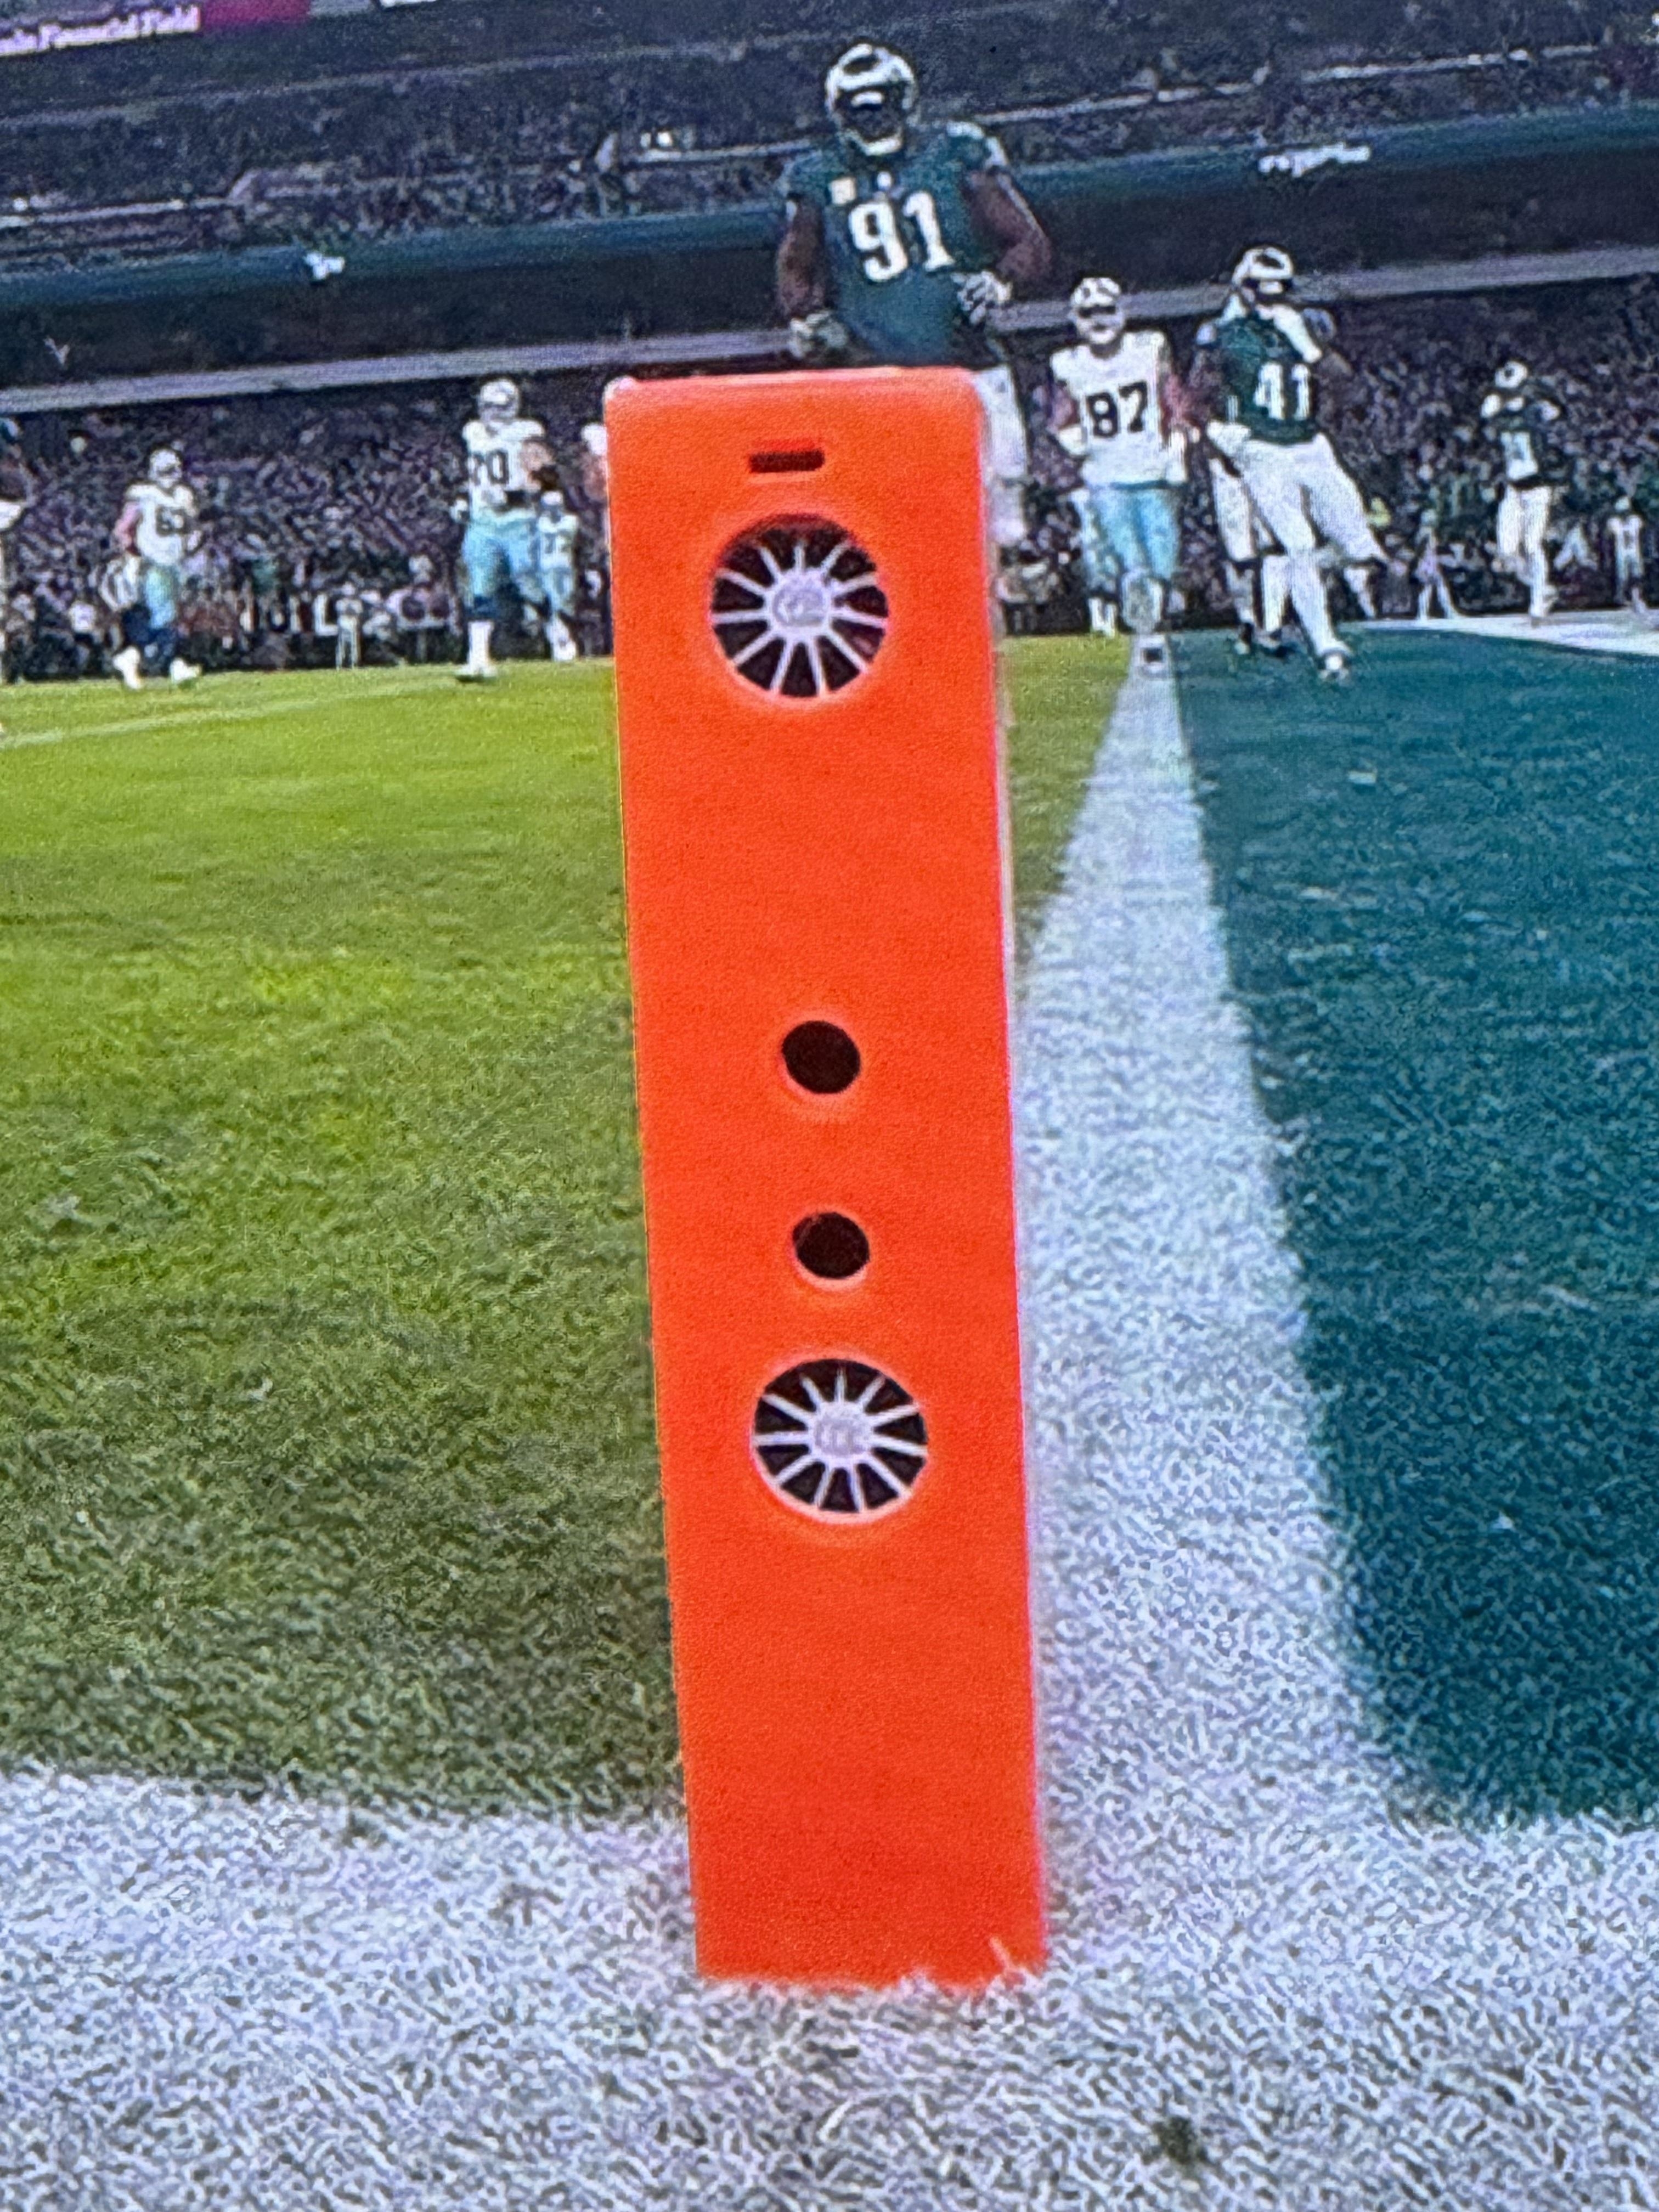 A tall thin, orange post on a football field showing circular openings for fans